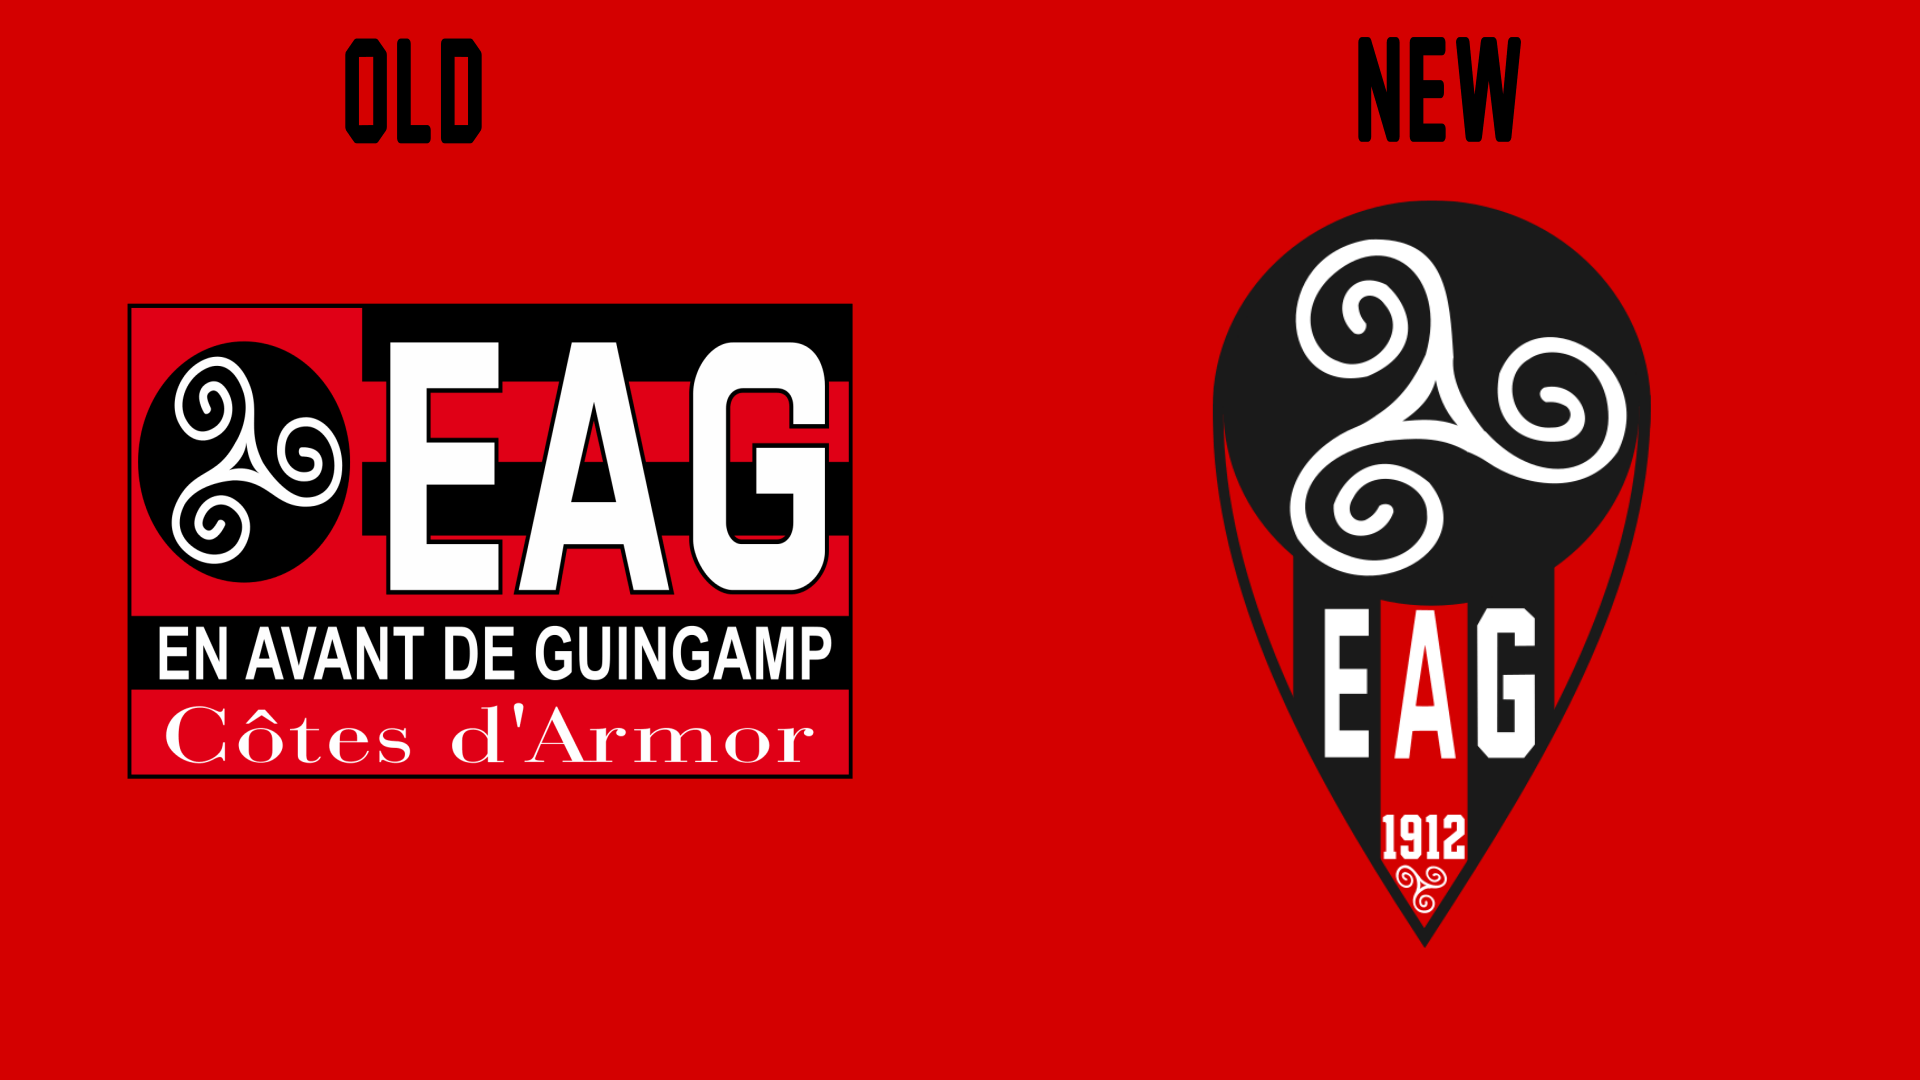 EAG Logo - EAG logo update (C&C Wanted) - Concepts - Chris Creamer's Sports ...